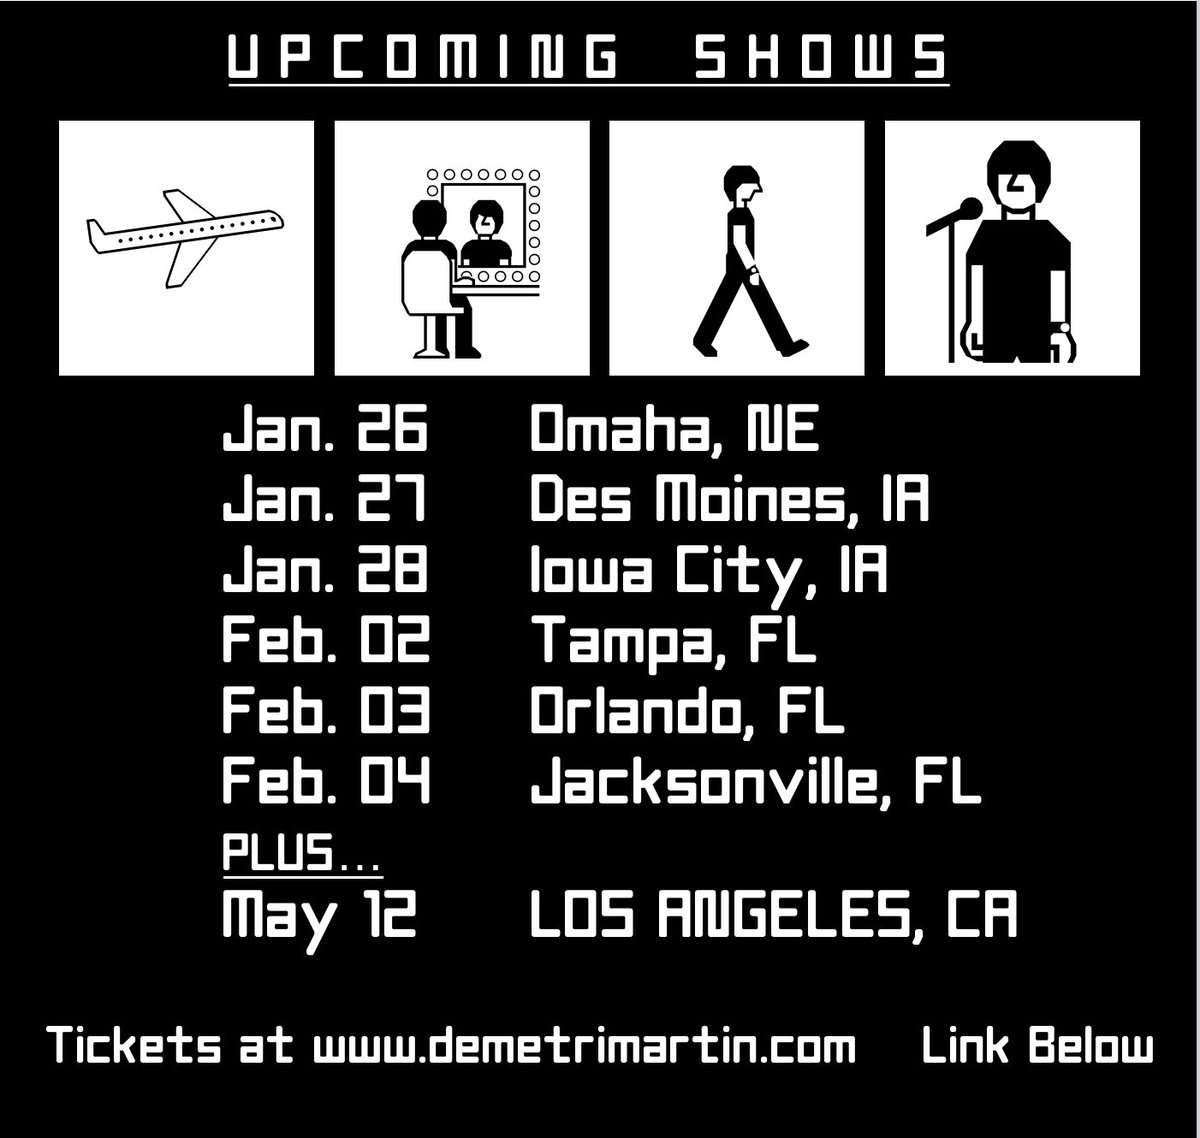 I guess the ticket link is actually above where it says 'Below' below. Ticket Link: demetrimartin.com